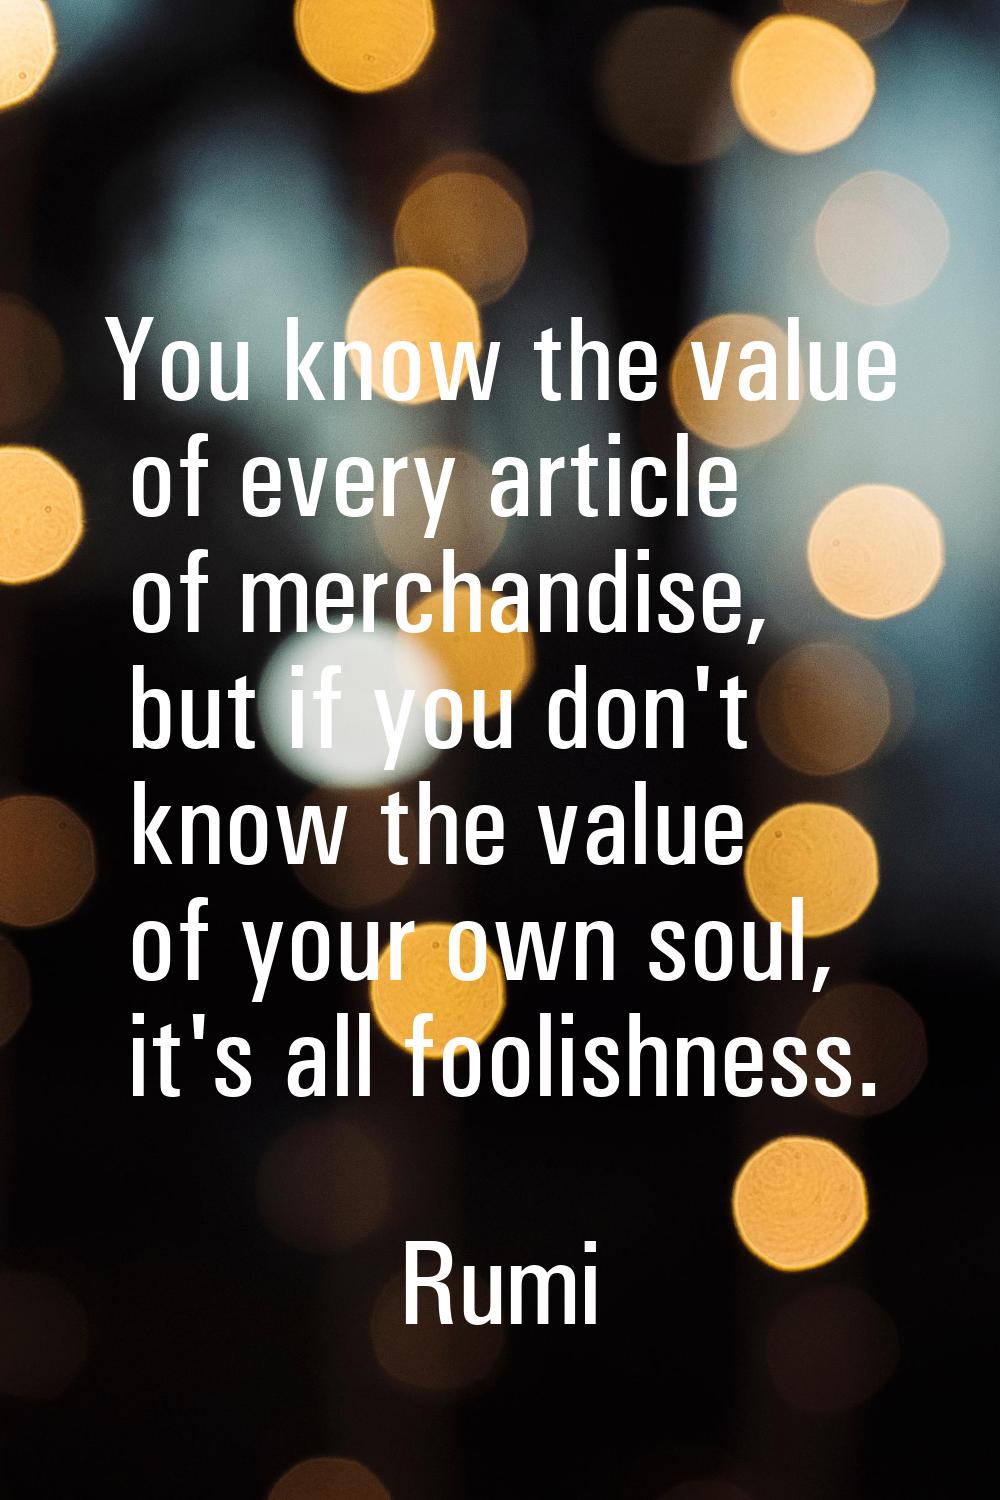 You know the value of every article of merchandise, but if you don't know the value of your own sou